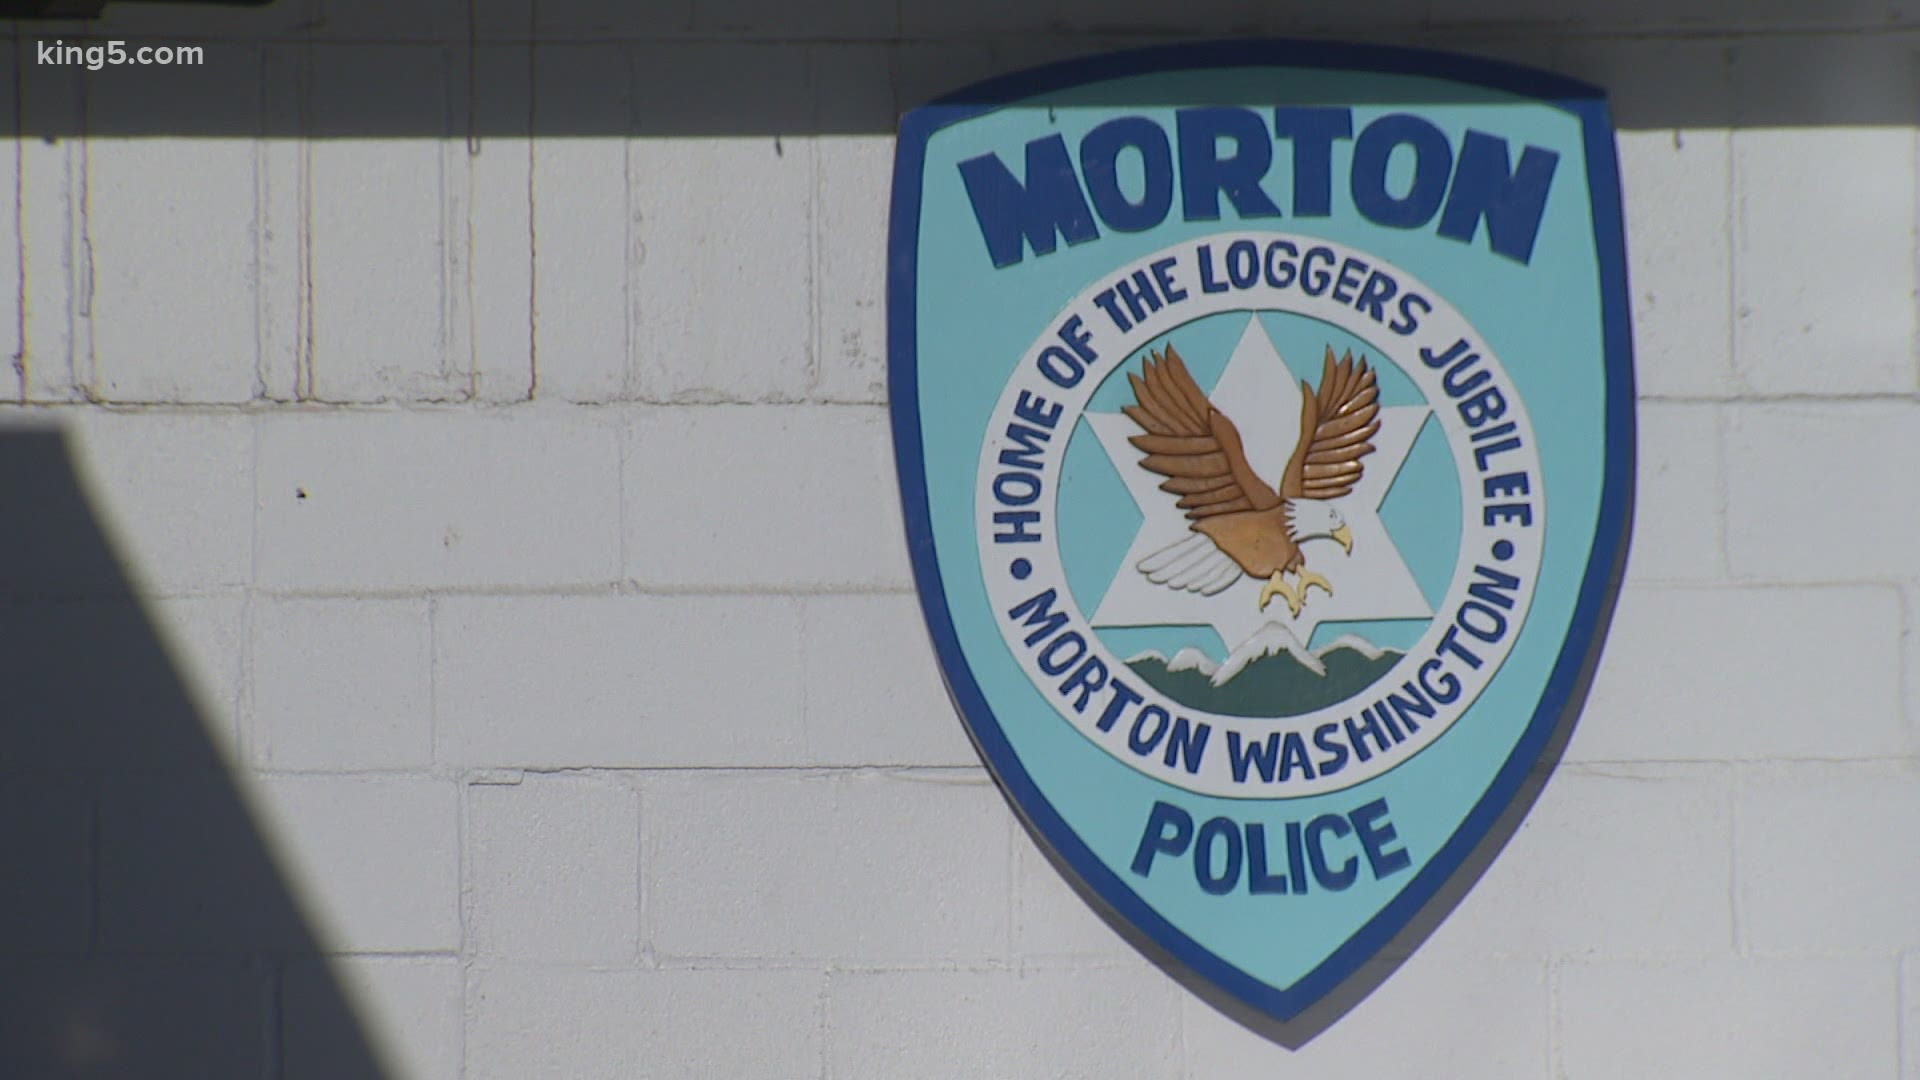 The post is the latest example activists have used to make their case that Morton's Police Chief Robert Morningstar is a far-right activist.